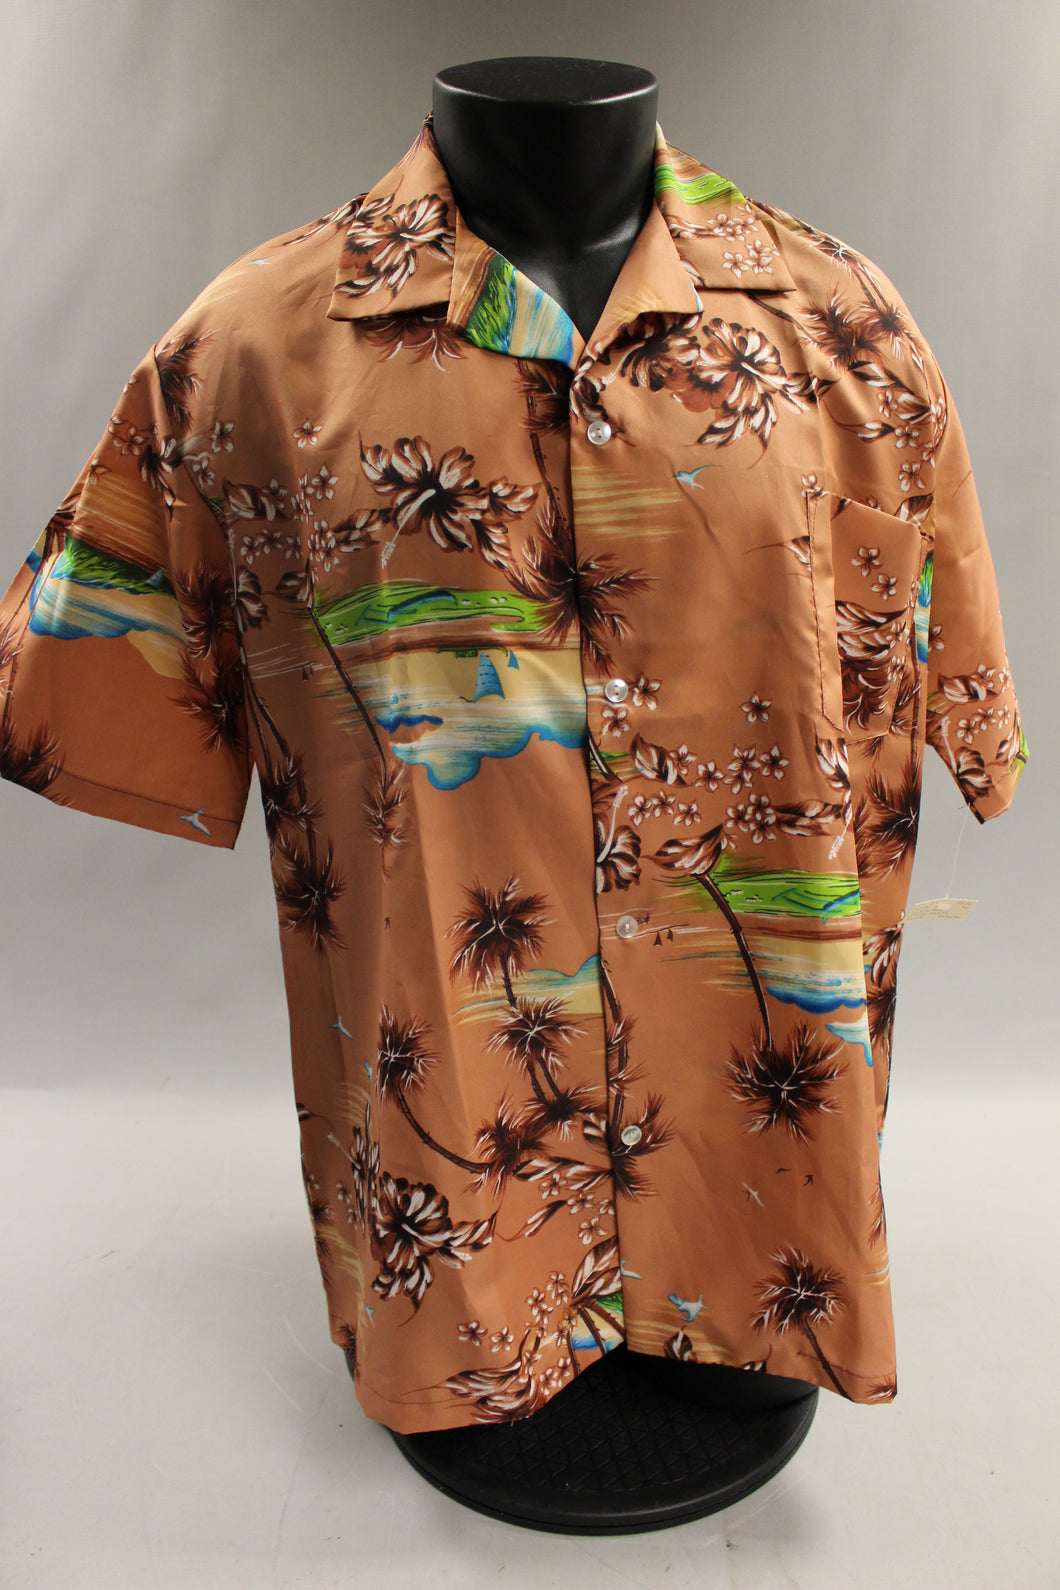 Men's Hawaii 100% Polyester Short Sleeve Button Up Floral Shirt - XL - Used